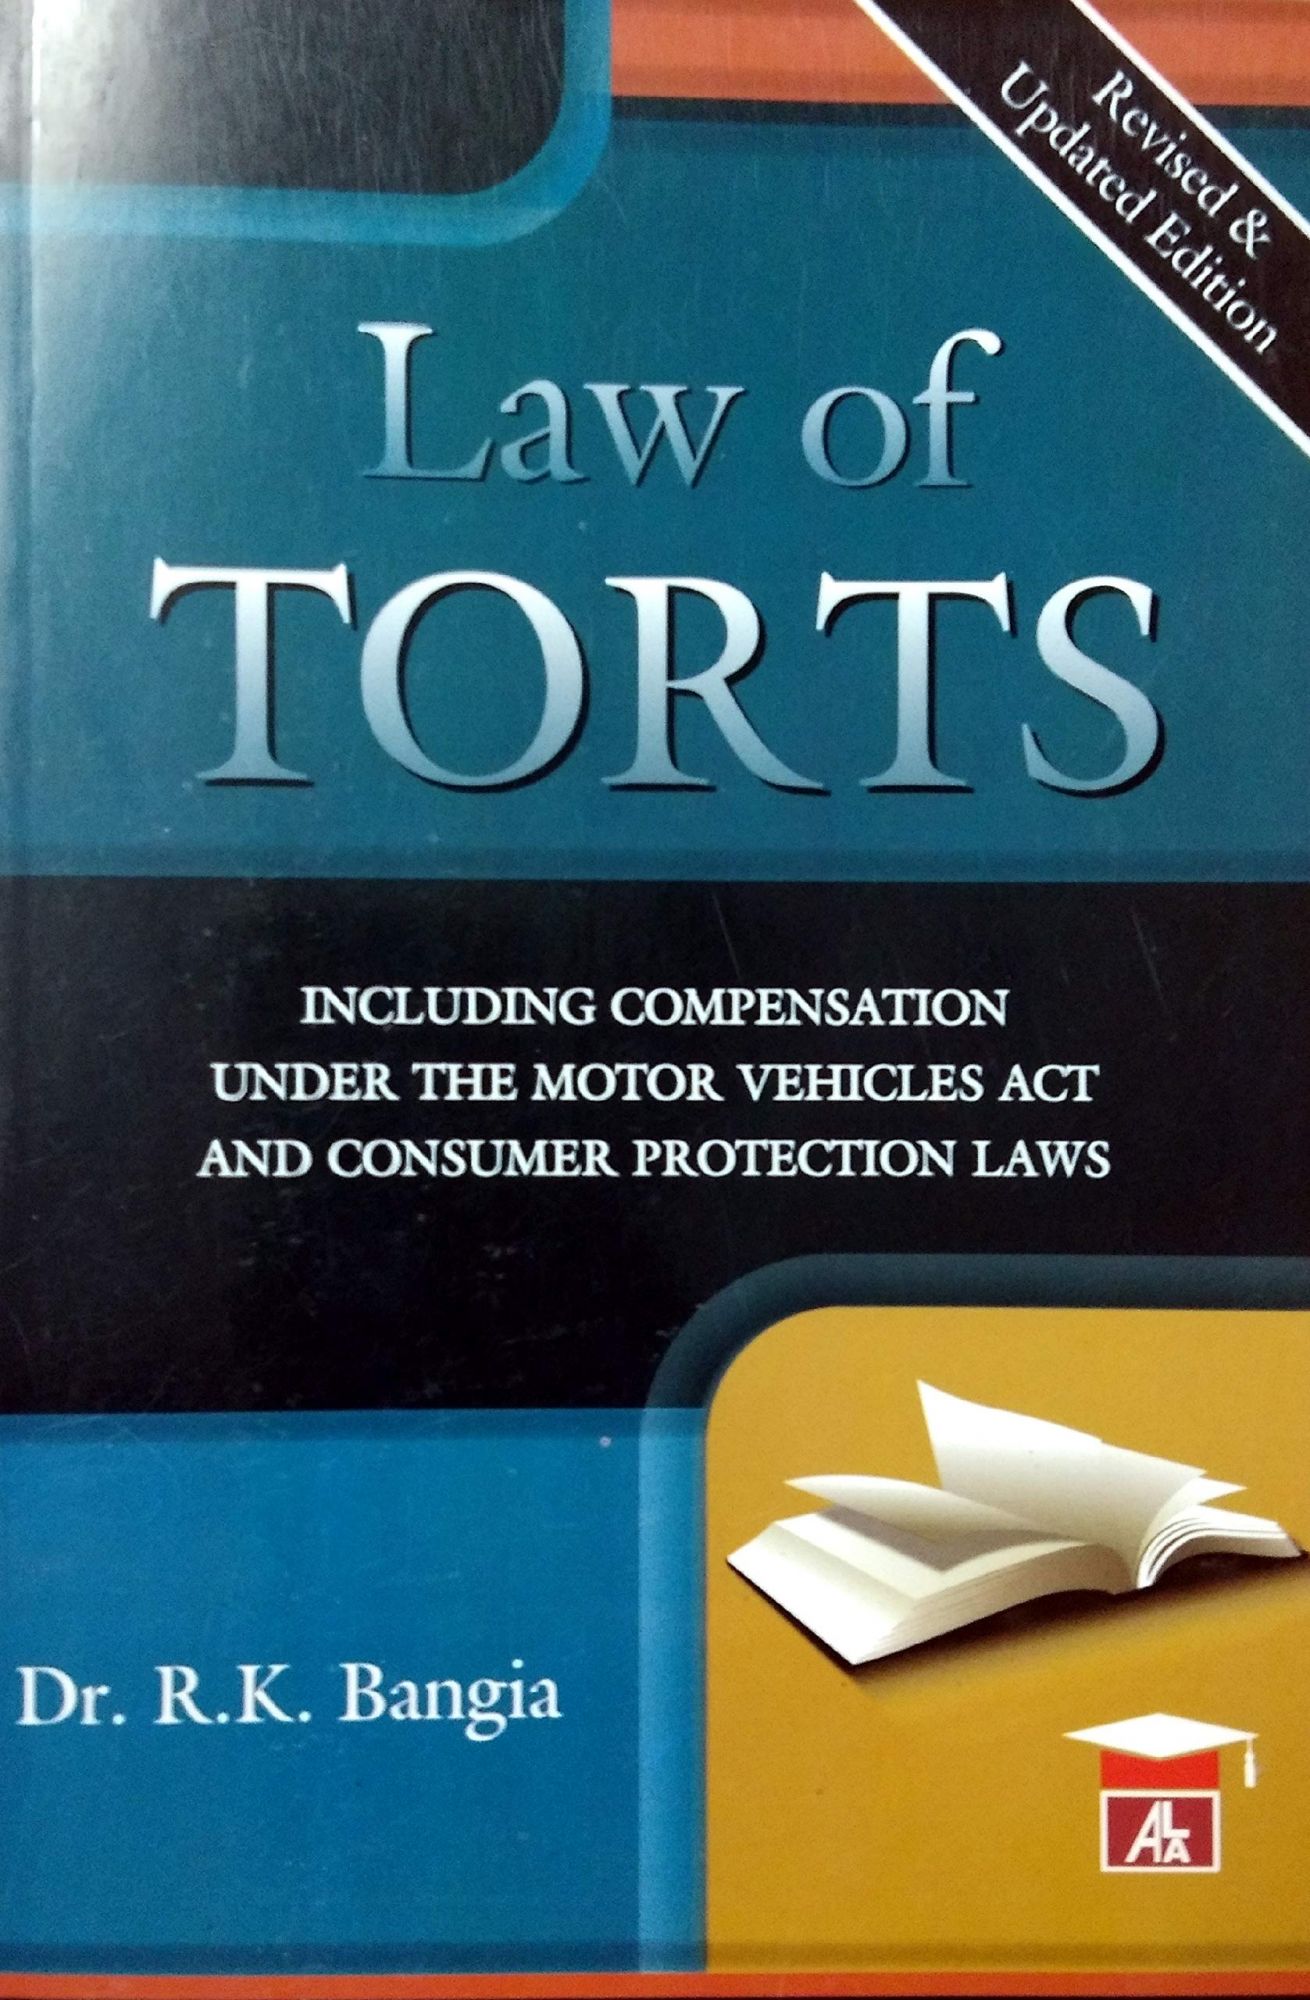 Dr. R.K.Bangia  Law  of Torts including Compensation under the Motor Vehicles Act and Consumer Protection Laws  by Allahabad Law Agency